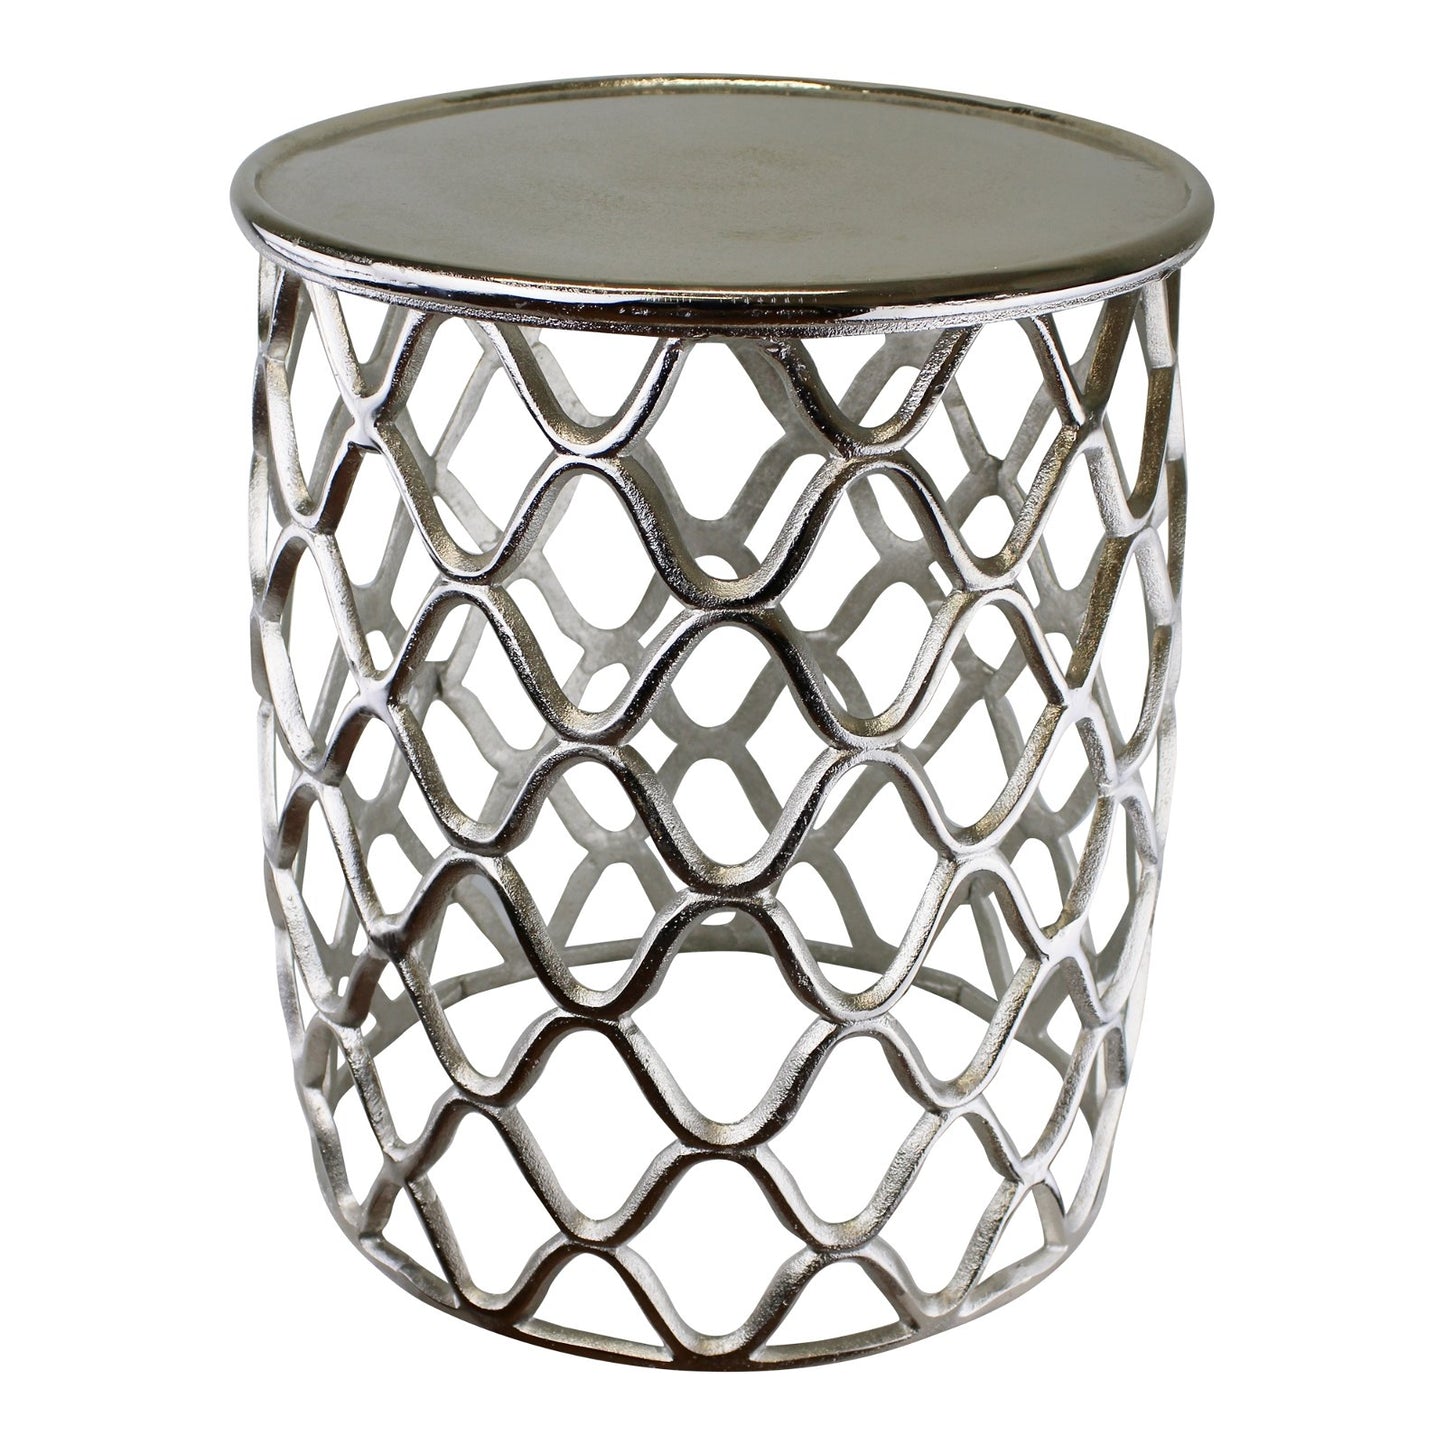 Decorative Silver Metal Side Table